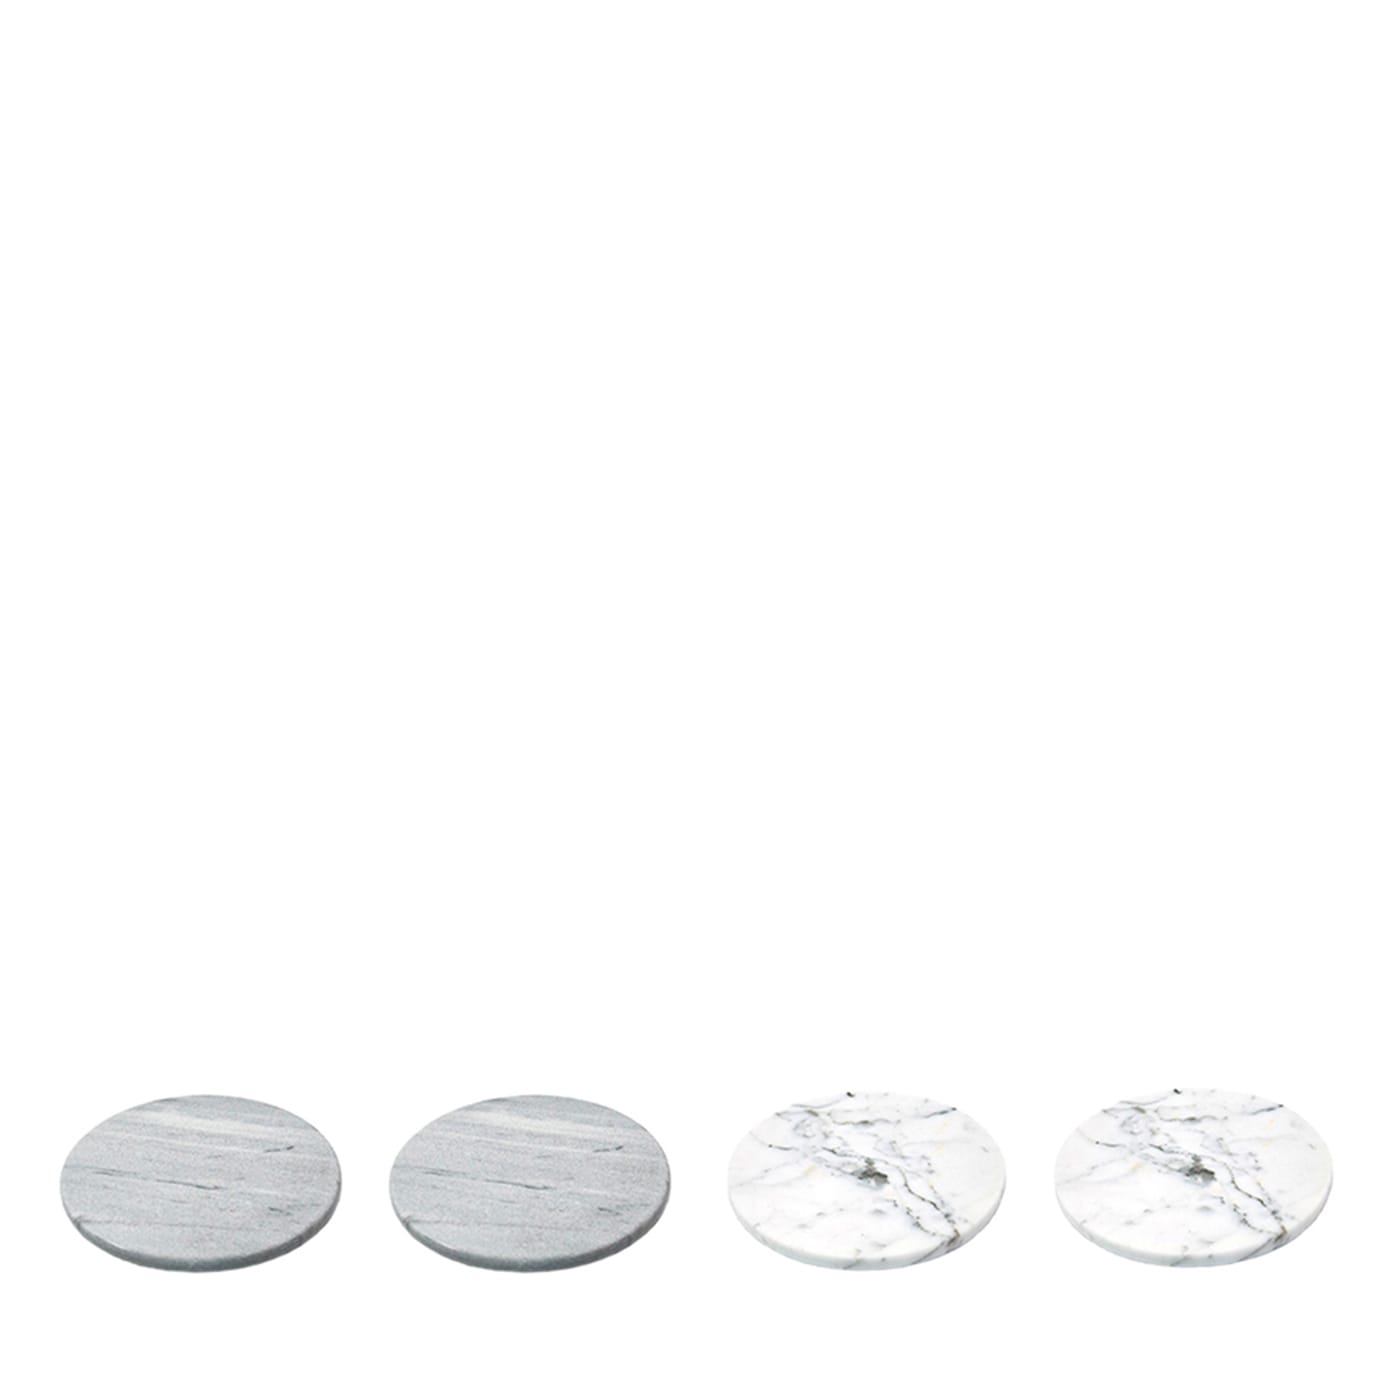 Set of 4 Round Marble Coasters - FiammettaV Home Collection